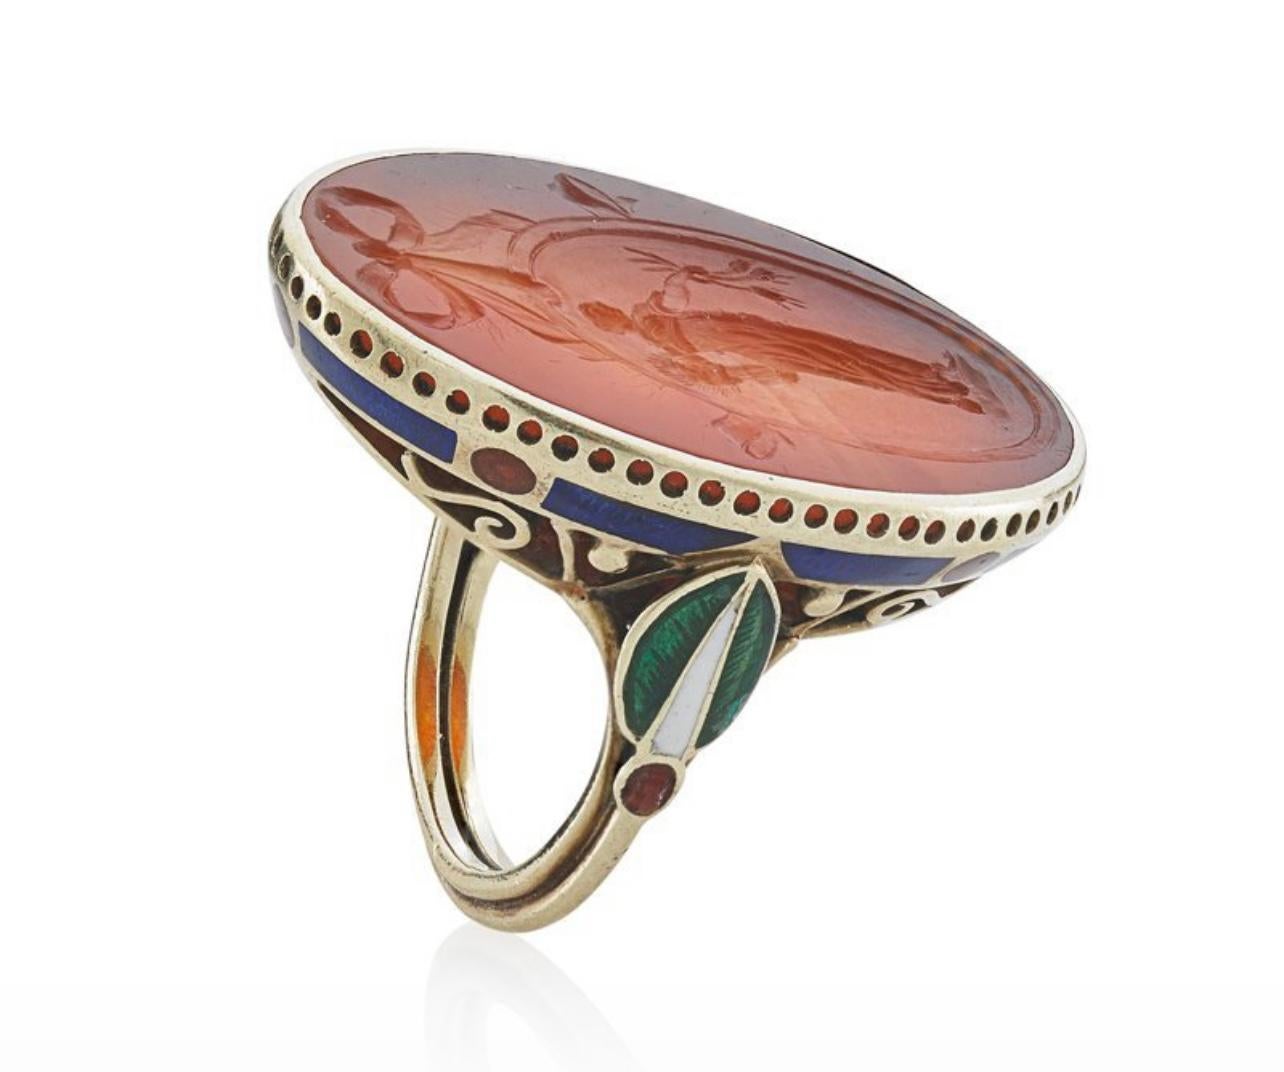 Much of Marie Zimmermann’s jewelry is institutionally owned, with the bulk belonging to the Metropolitan Museum in New York. Here is a rare example on the open market — a carnelian intaglio enamel and gold ring. Size 6.5, 7.1 dwt. In excellent